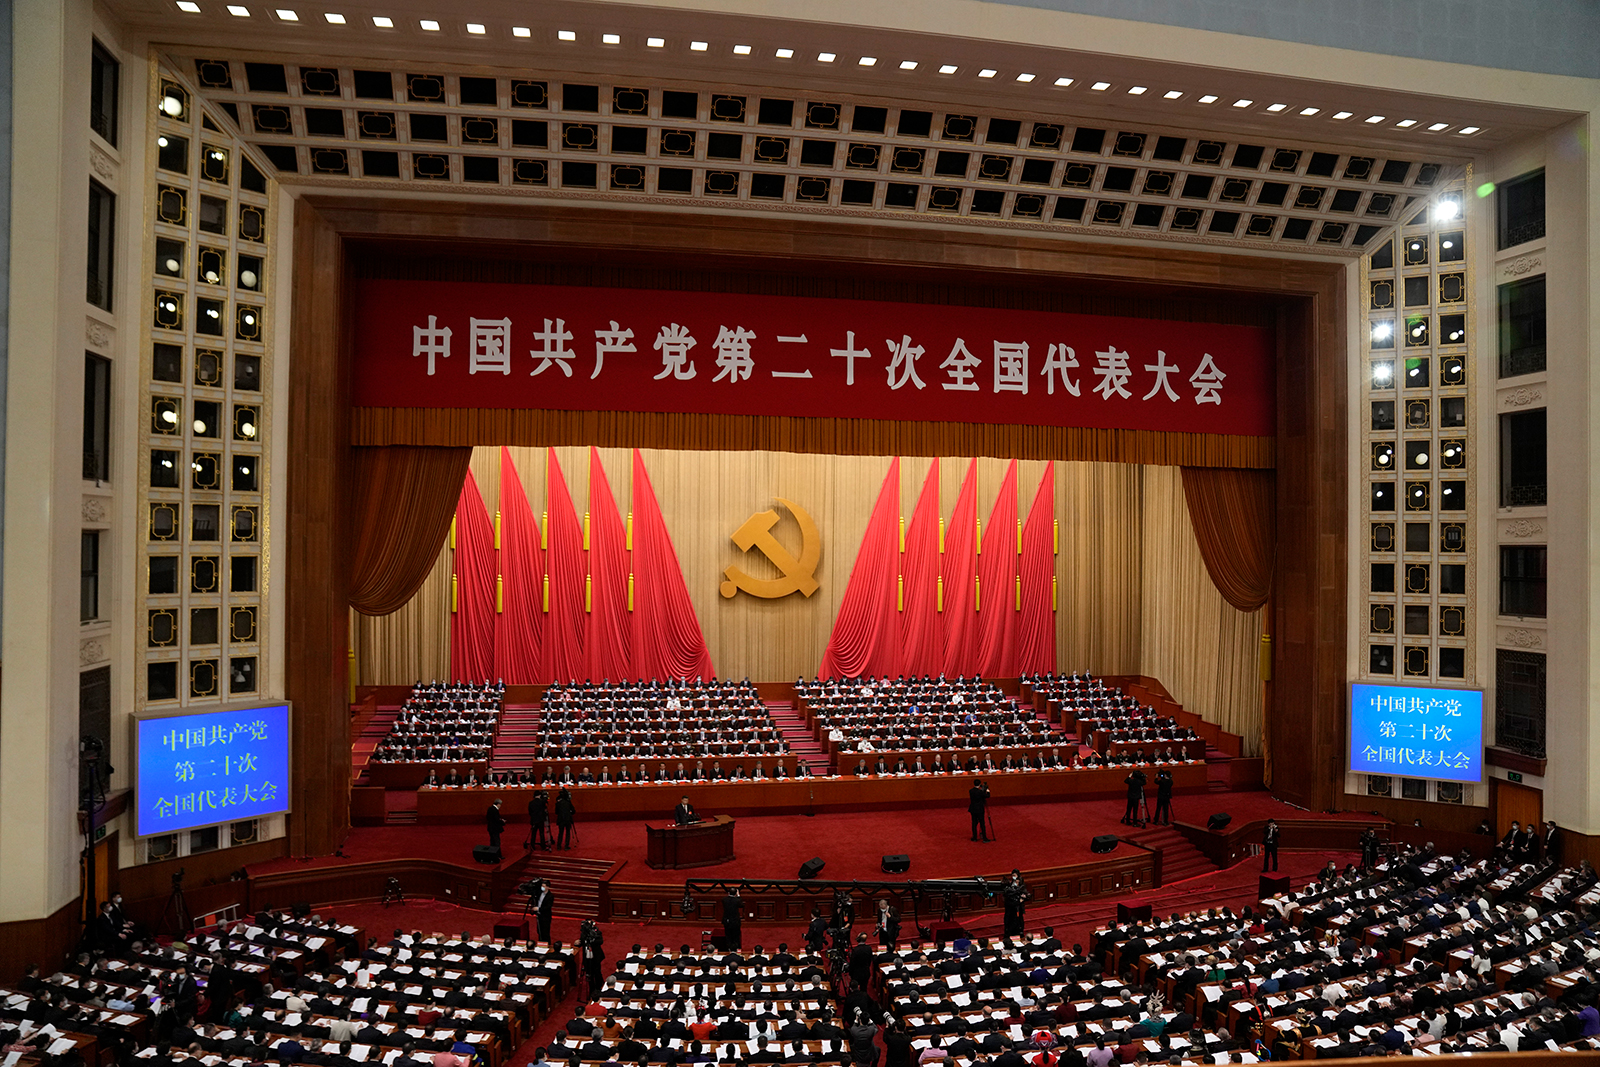 Chinese leader Xi Jinping delivers a speech at the opening ceremony of the 20th National Congress of China's ruling Communist Party in Beijing on October 16.